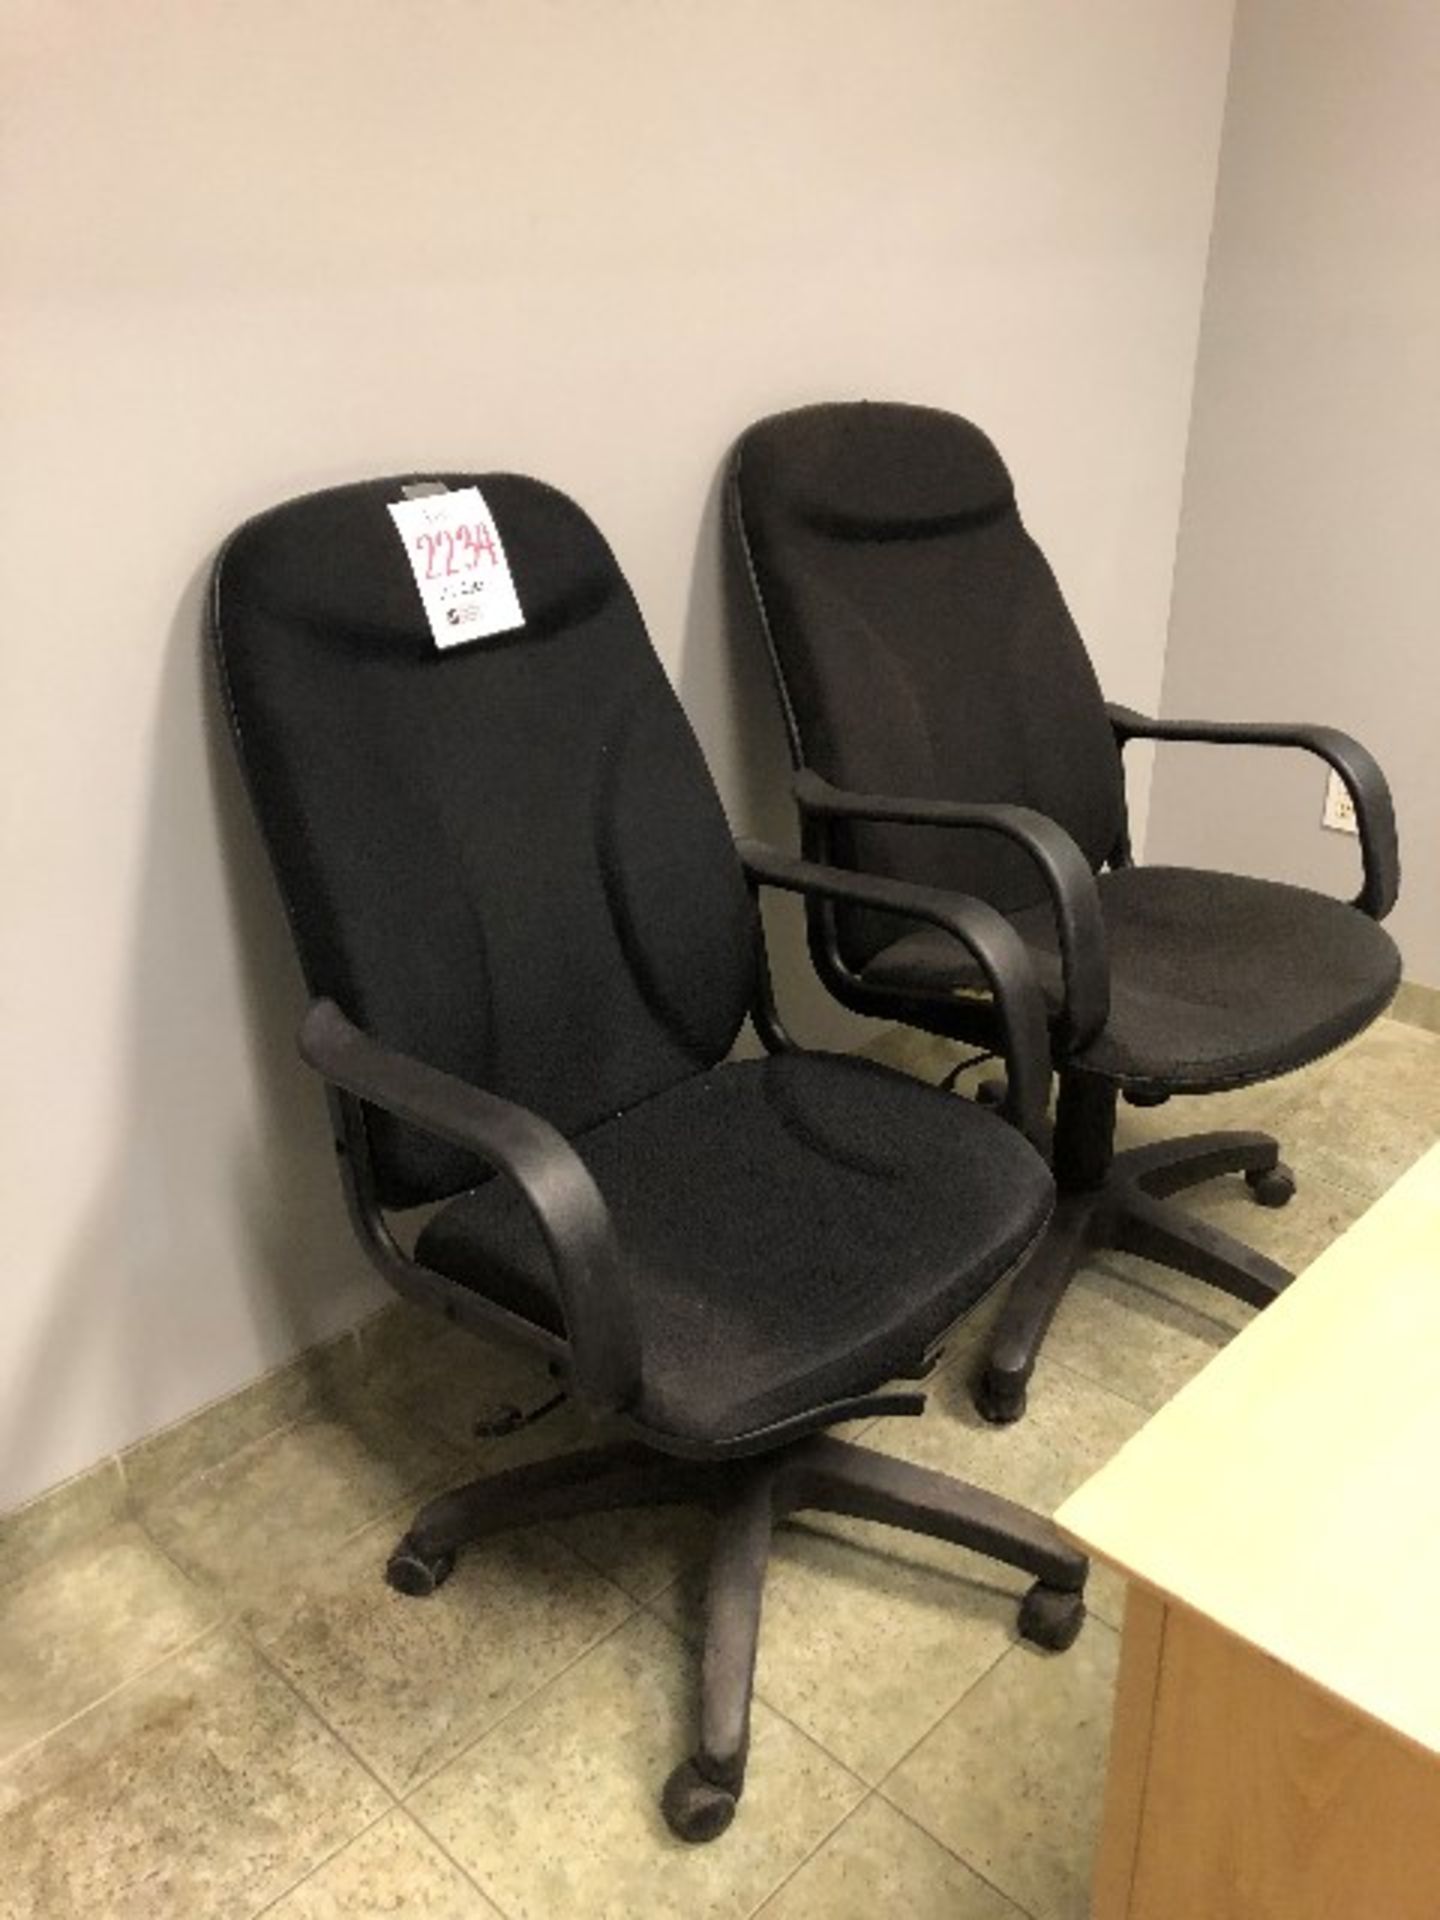 Arm chairs black assorted 2pcs (Lot)